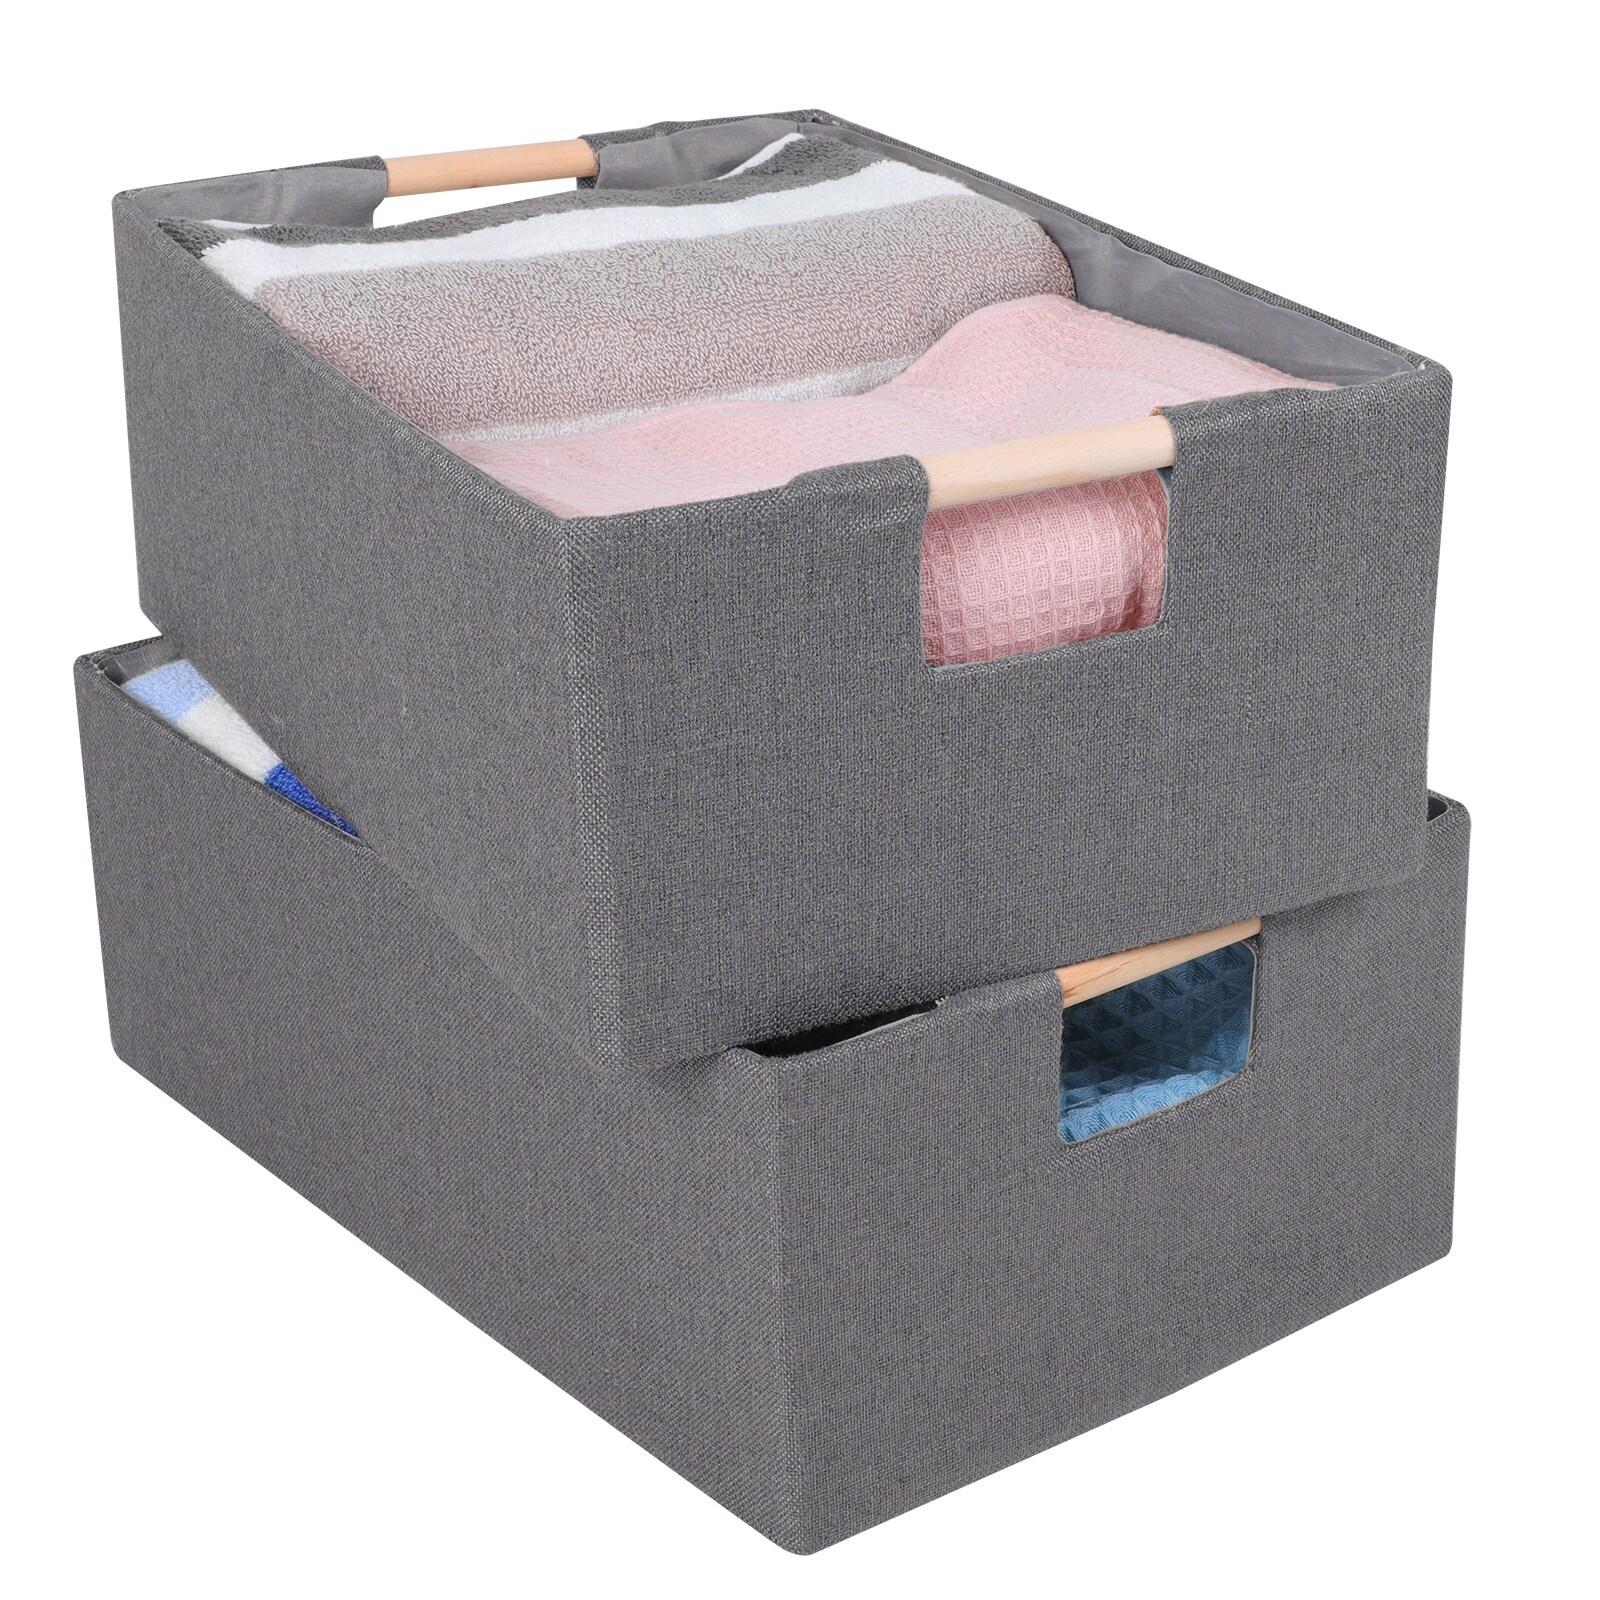 https://ak1.ostkcdn.com/images/products/is/images/direct/3911e5a9cdcacc878e8a13cdb4db9331510dd880/Fabric-Foldable-Storage-Bins-Organizer-Container-W-Wood-Handles-2Pcs.jpg